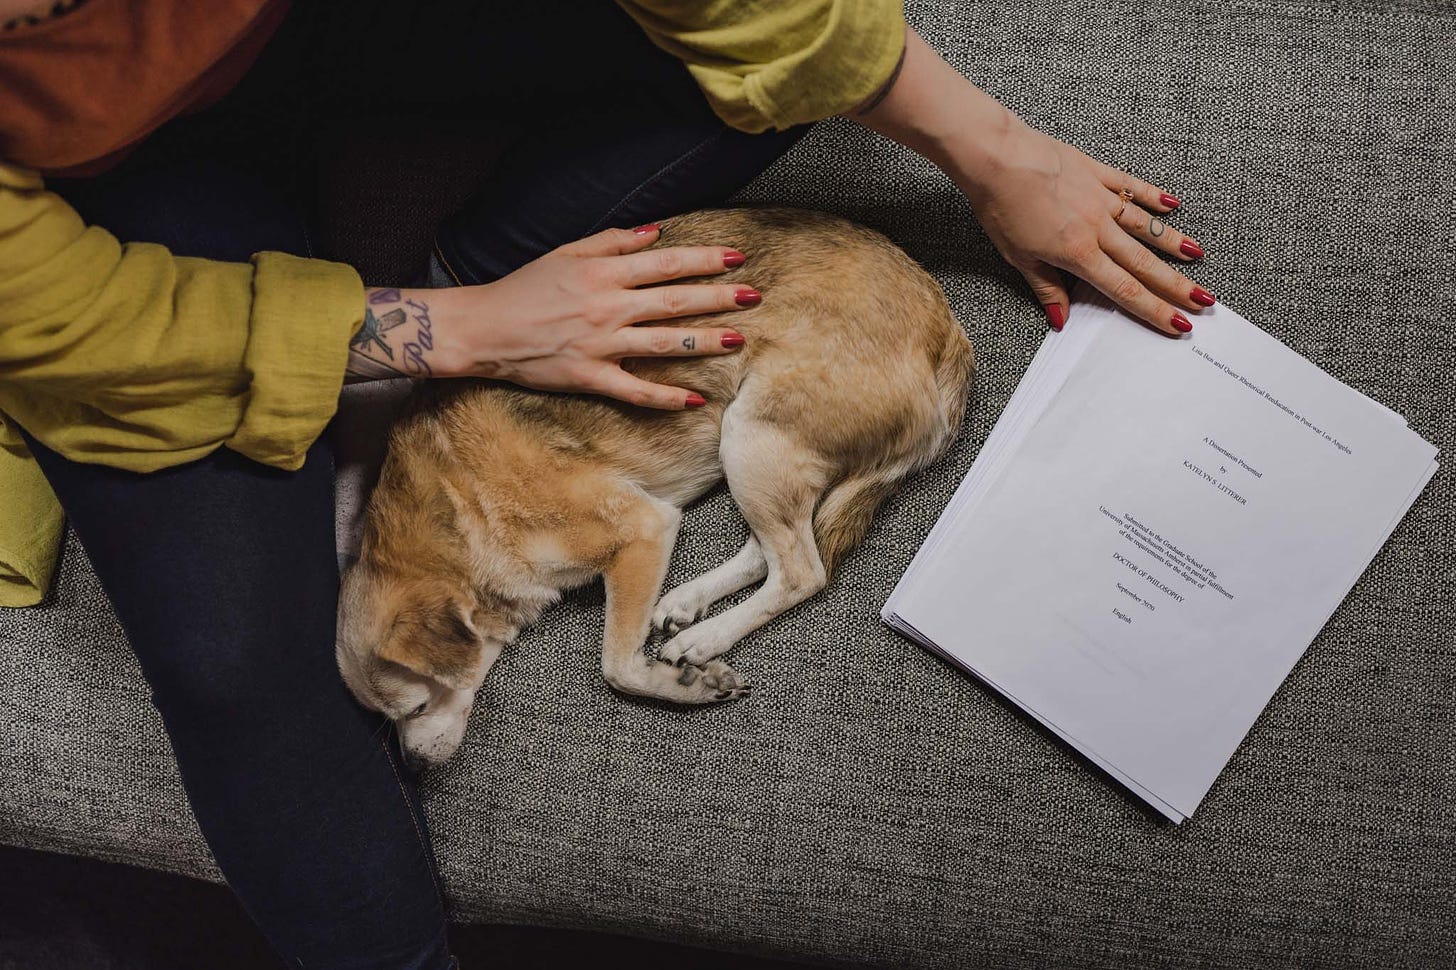 Image Description: Kate is sitting on a couch snuggling with her sleeping dog, Lucy, with her hand on her printed dissertation.